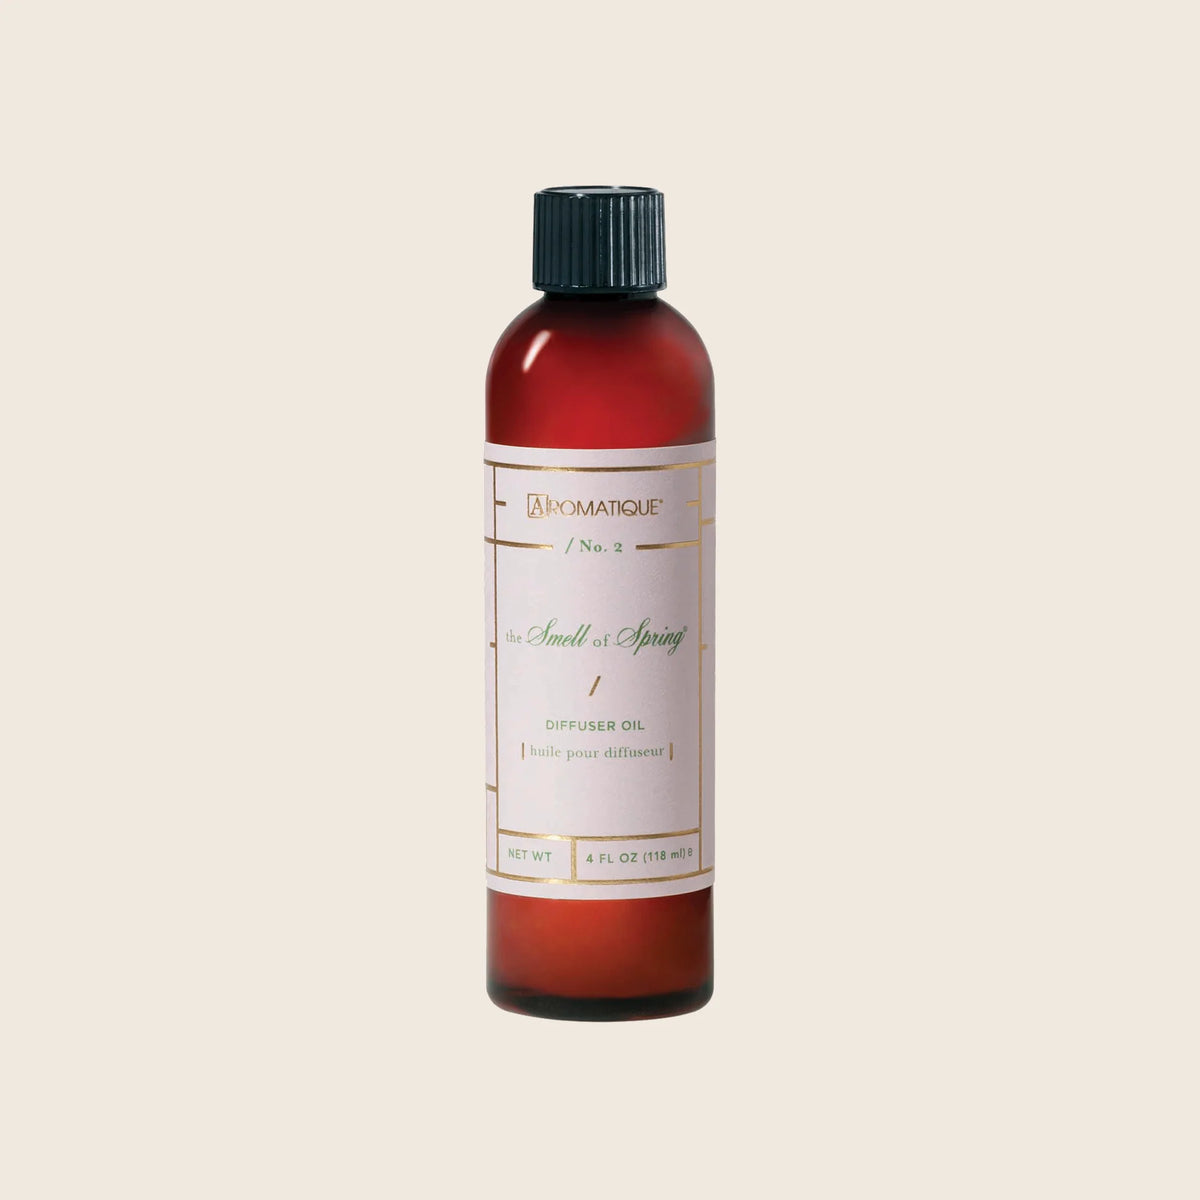 Aromatique - Diffuser Oil Refill The Smell of Spring